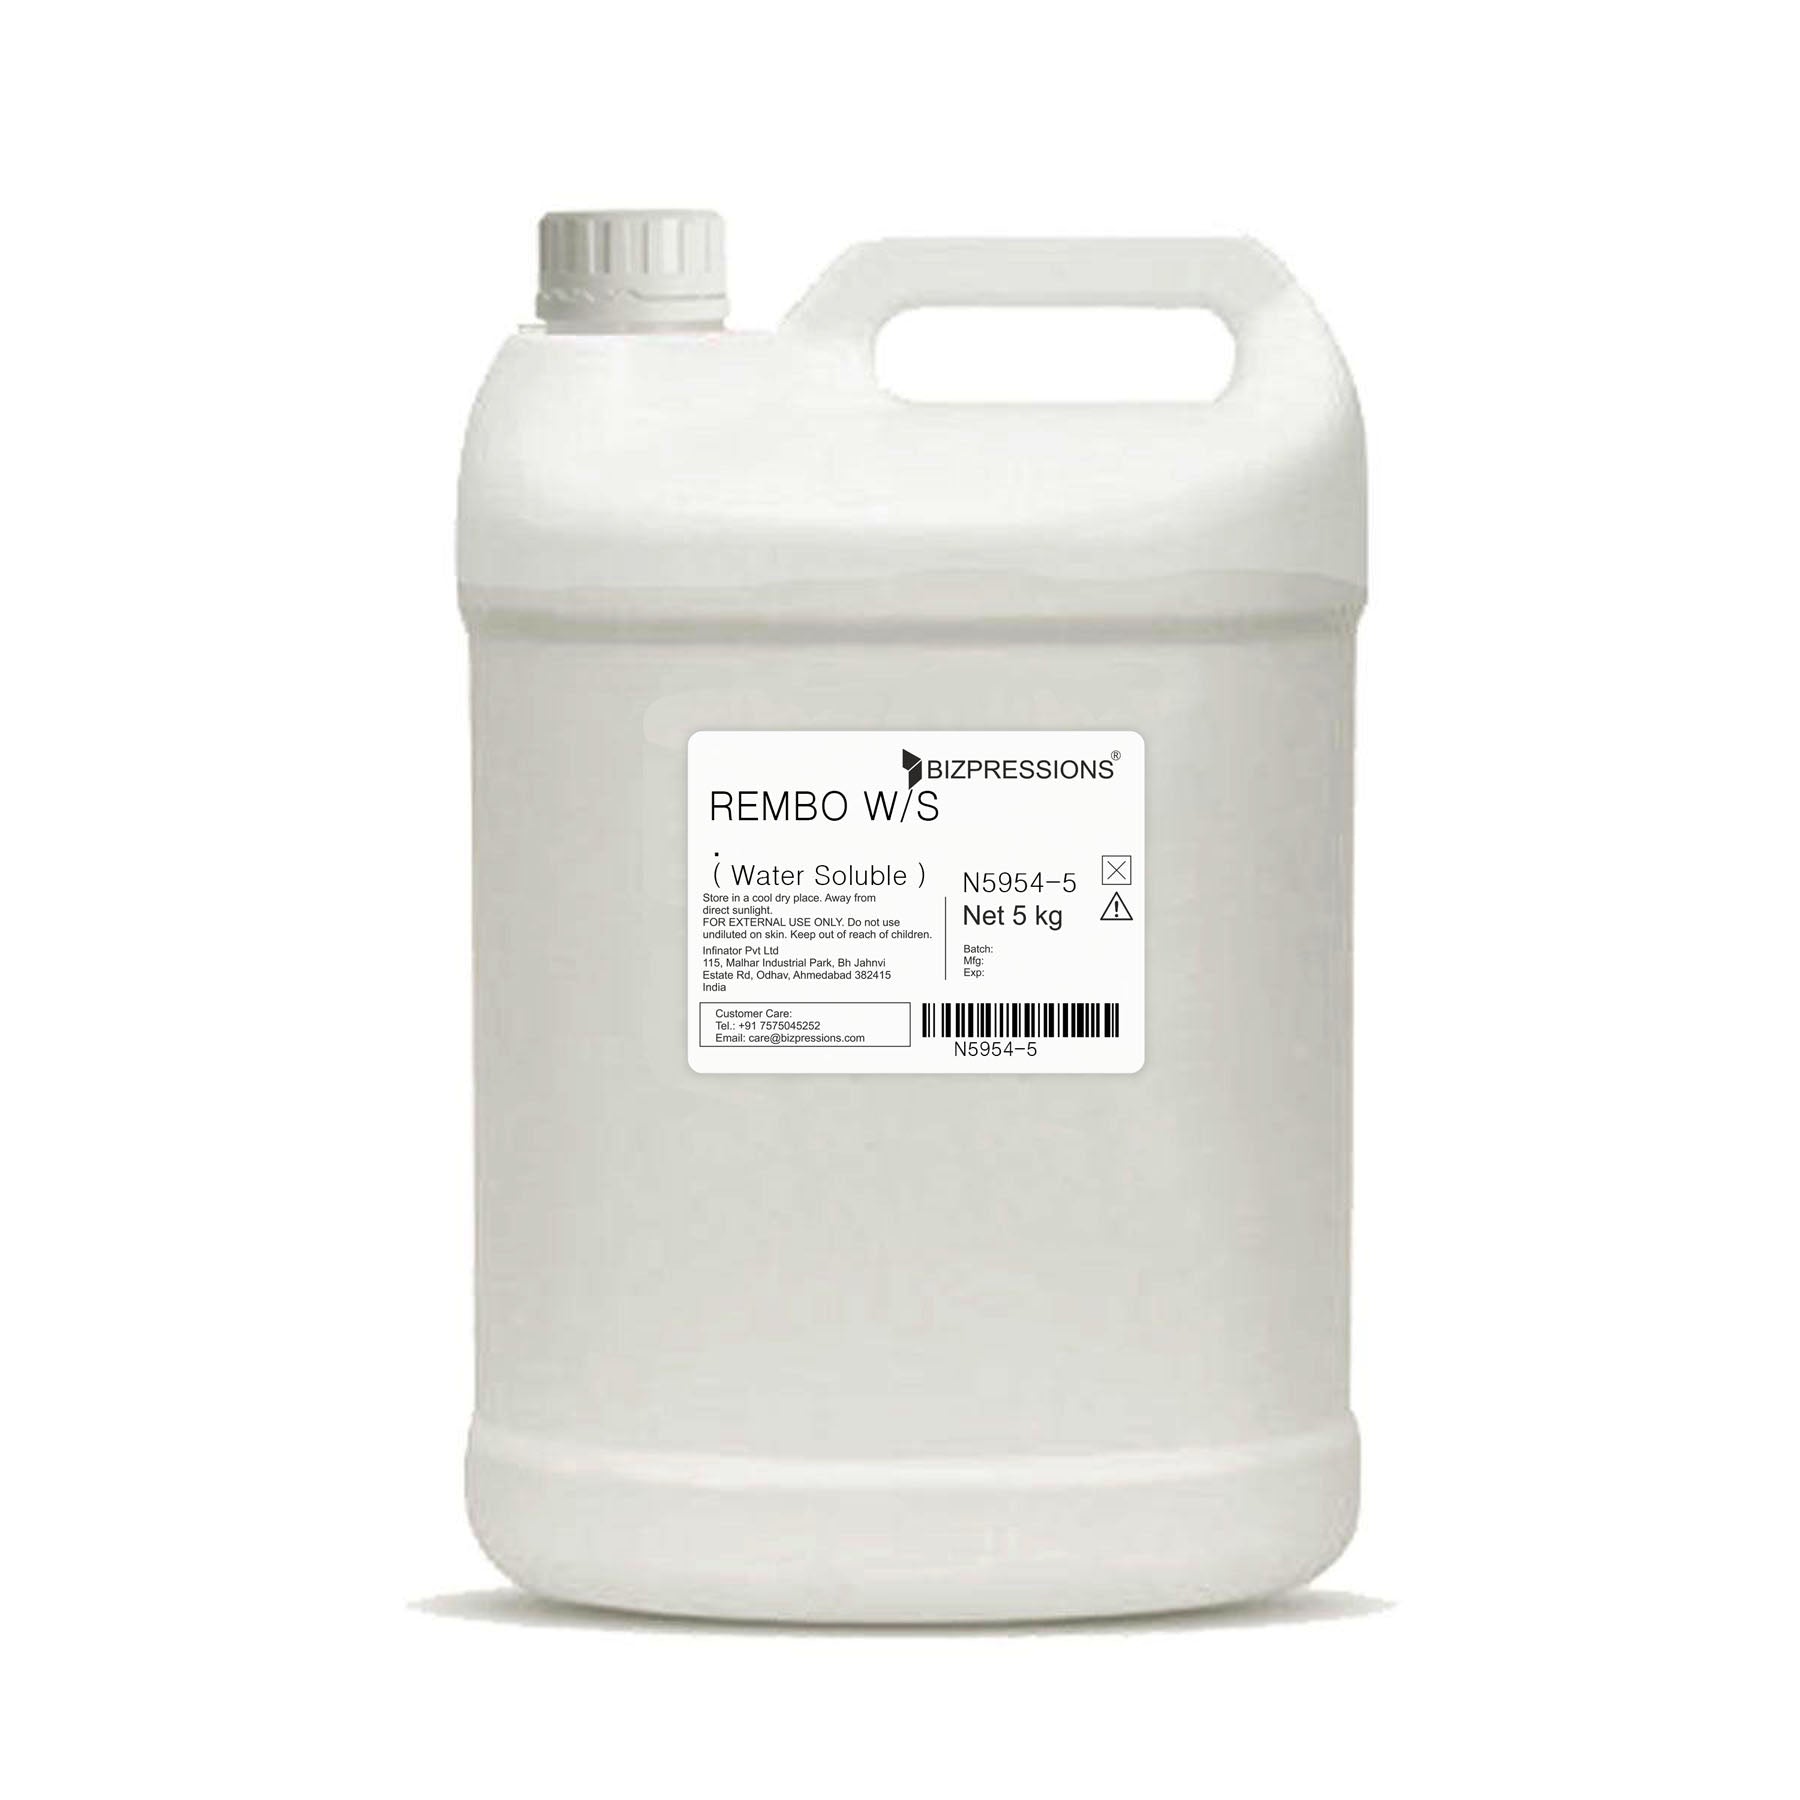 REMBO W/S - Fragrance ( Water Soluble ) - 5 kg